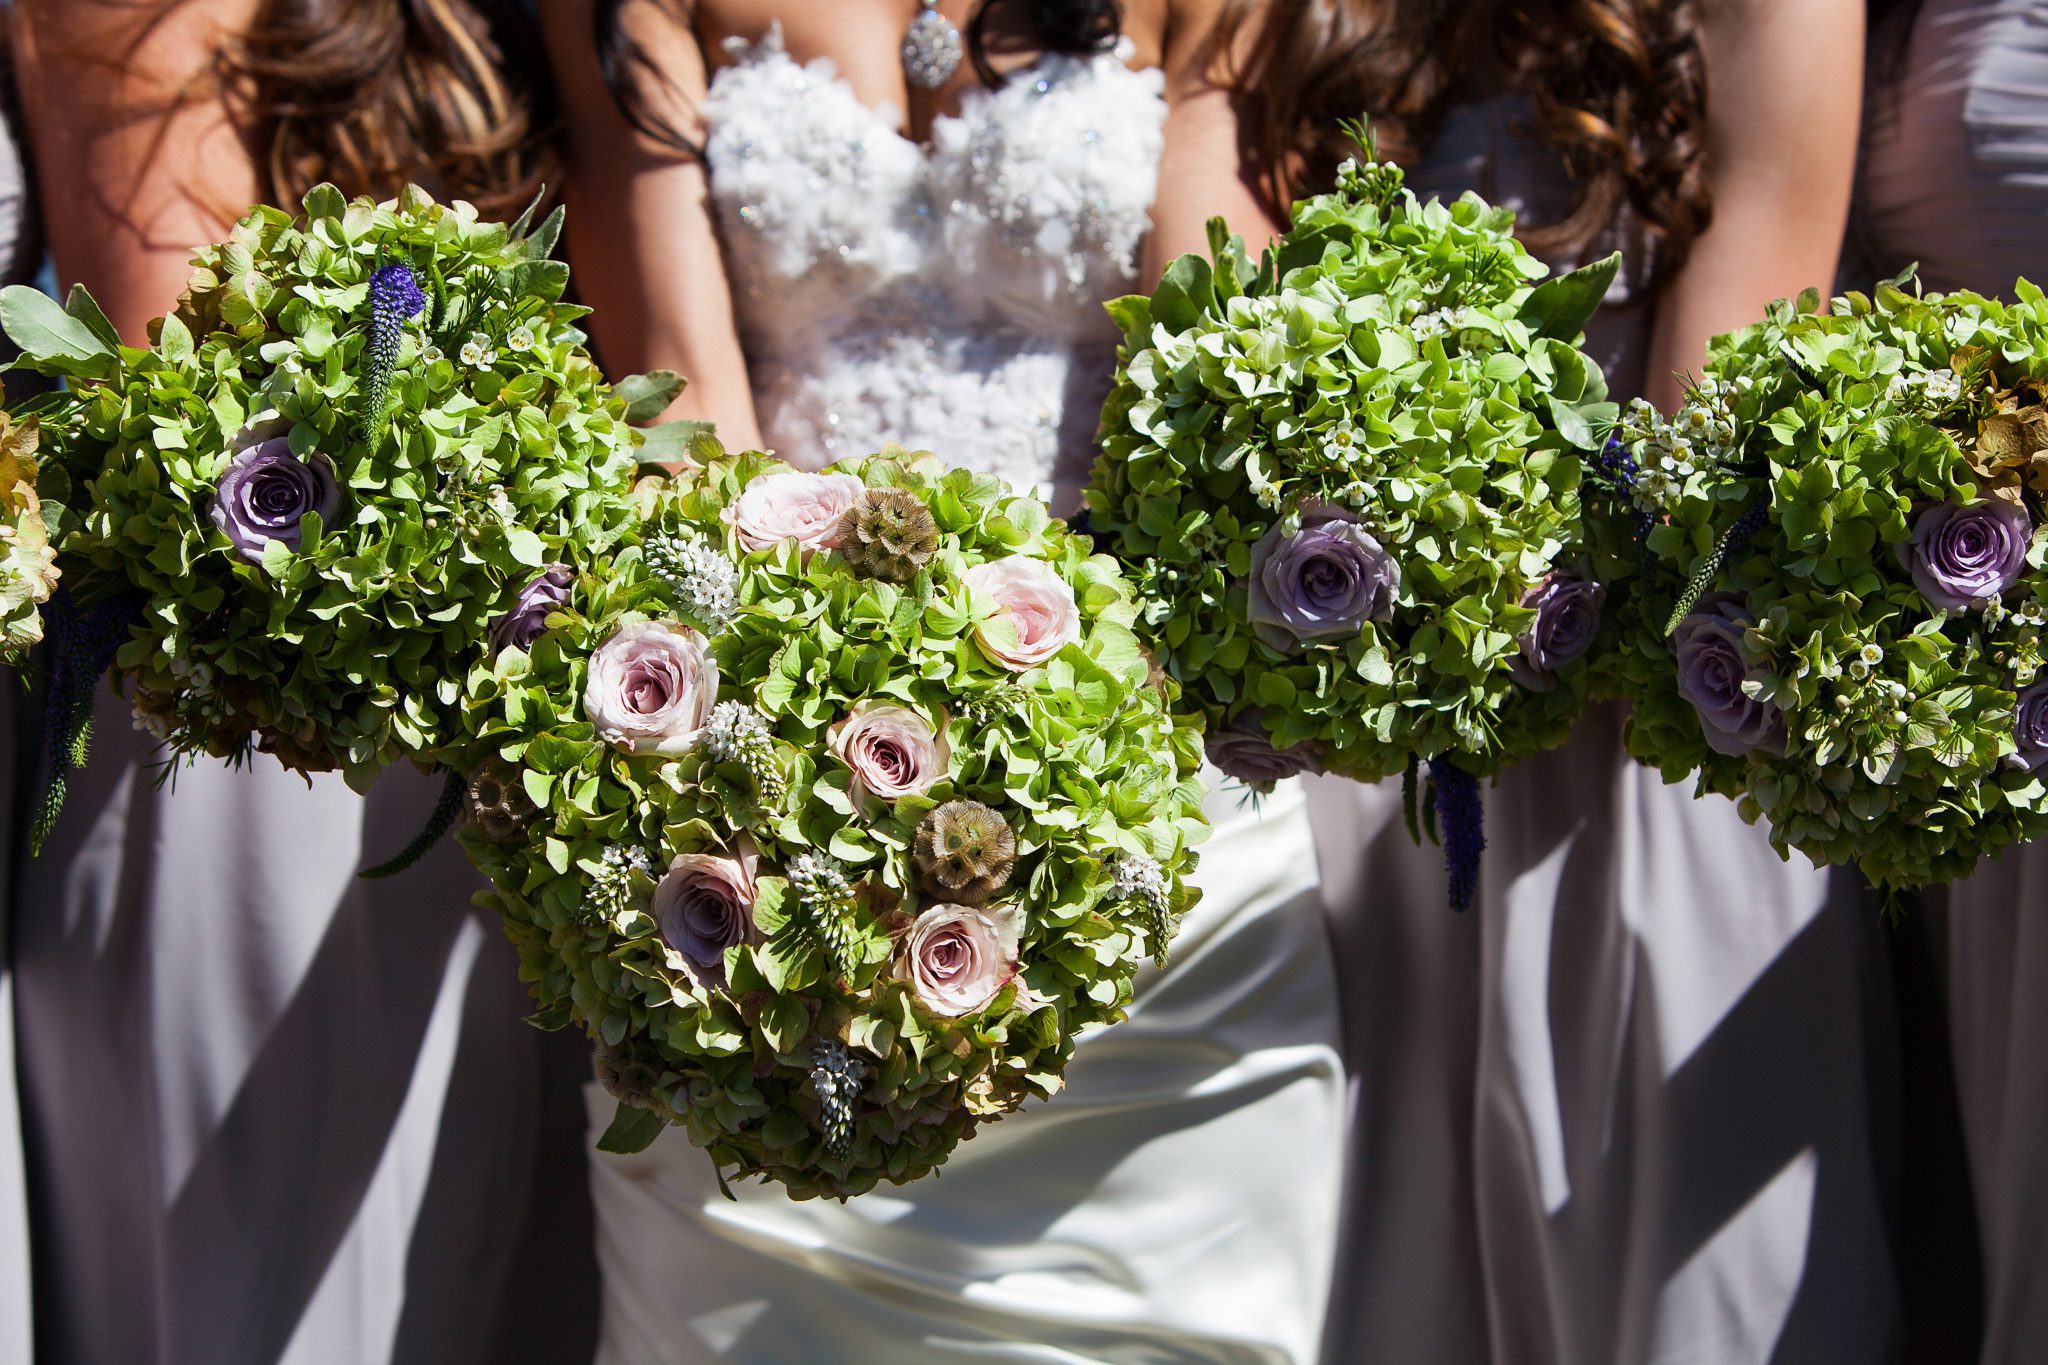 bride's and bridesmaids' bouquets detail – Tahoe Truckee Donner Lake wedding photography